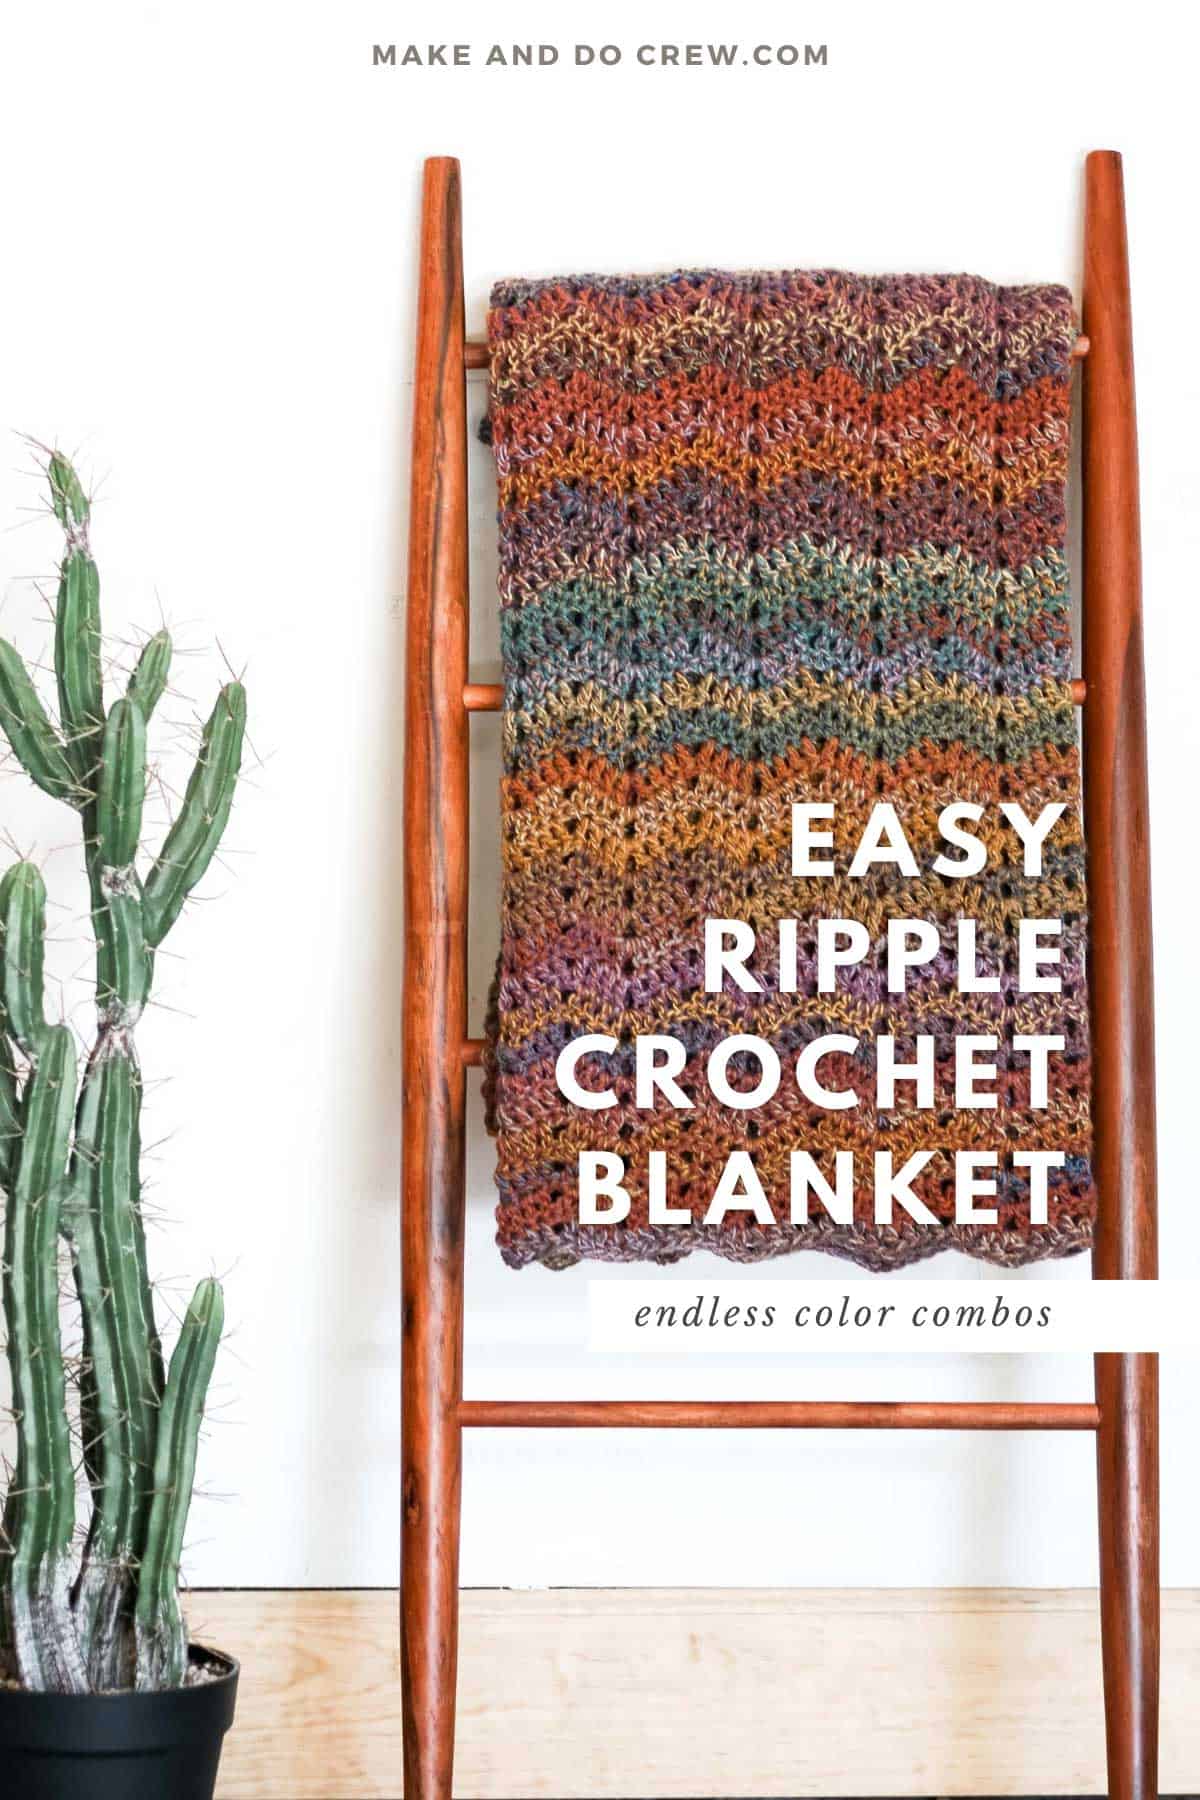 A wooden ladder leaning on a white wall with a crochet blanket hanging on it.